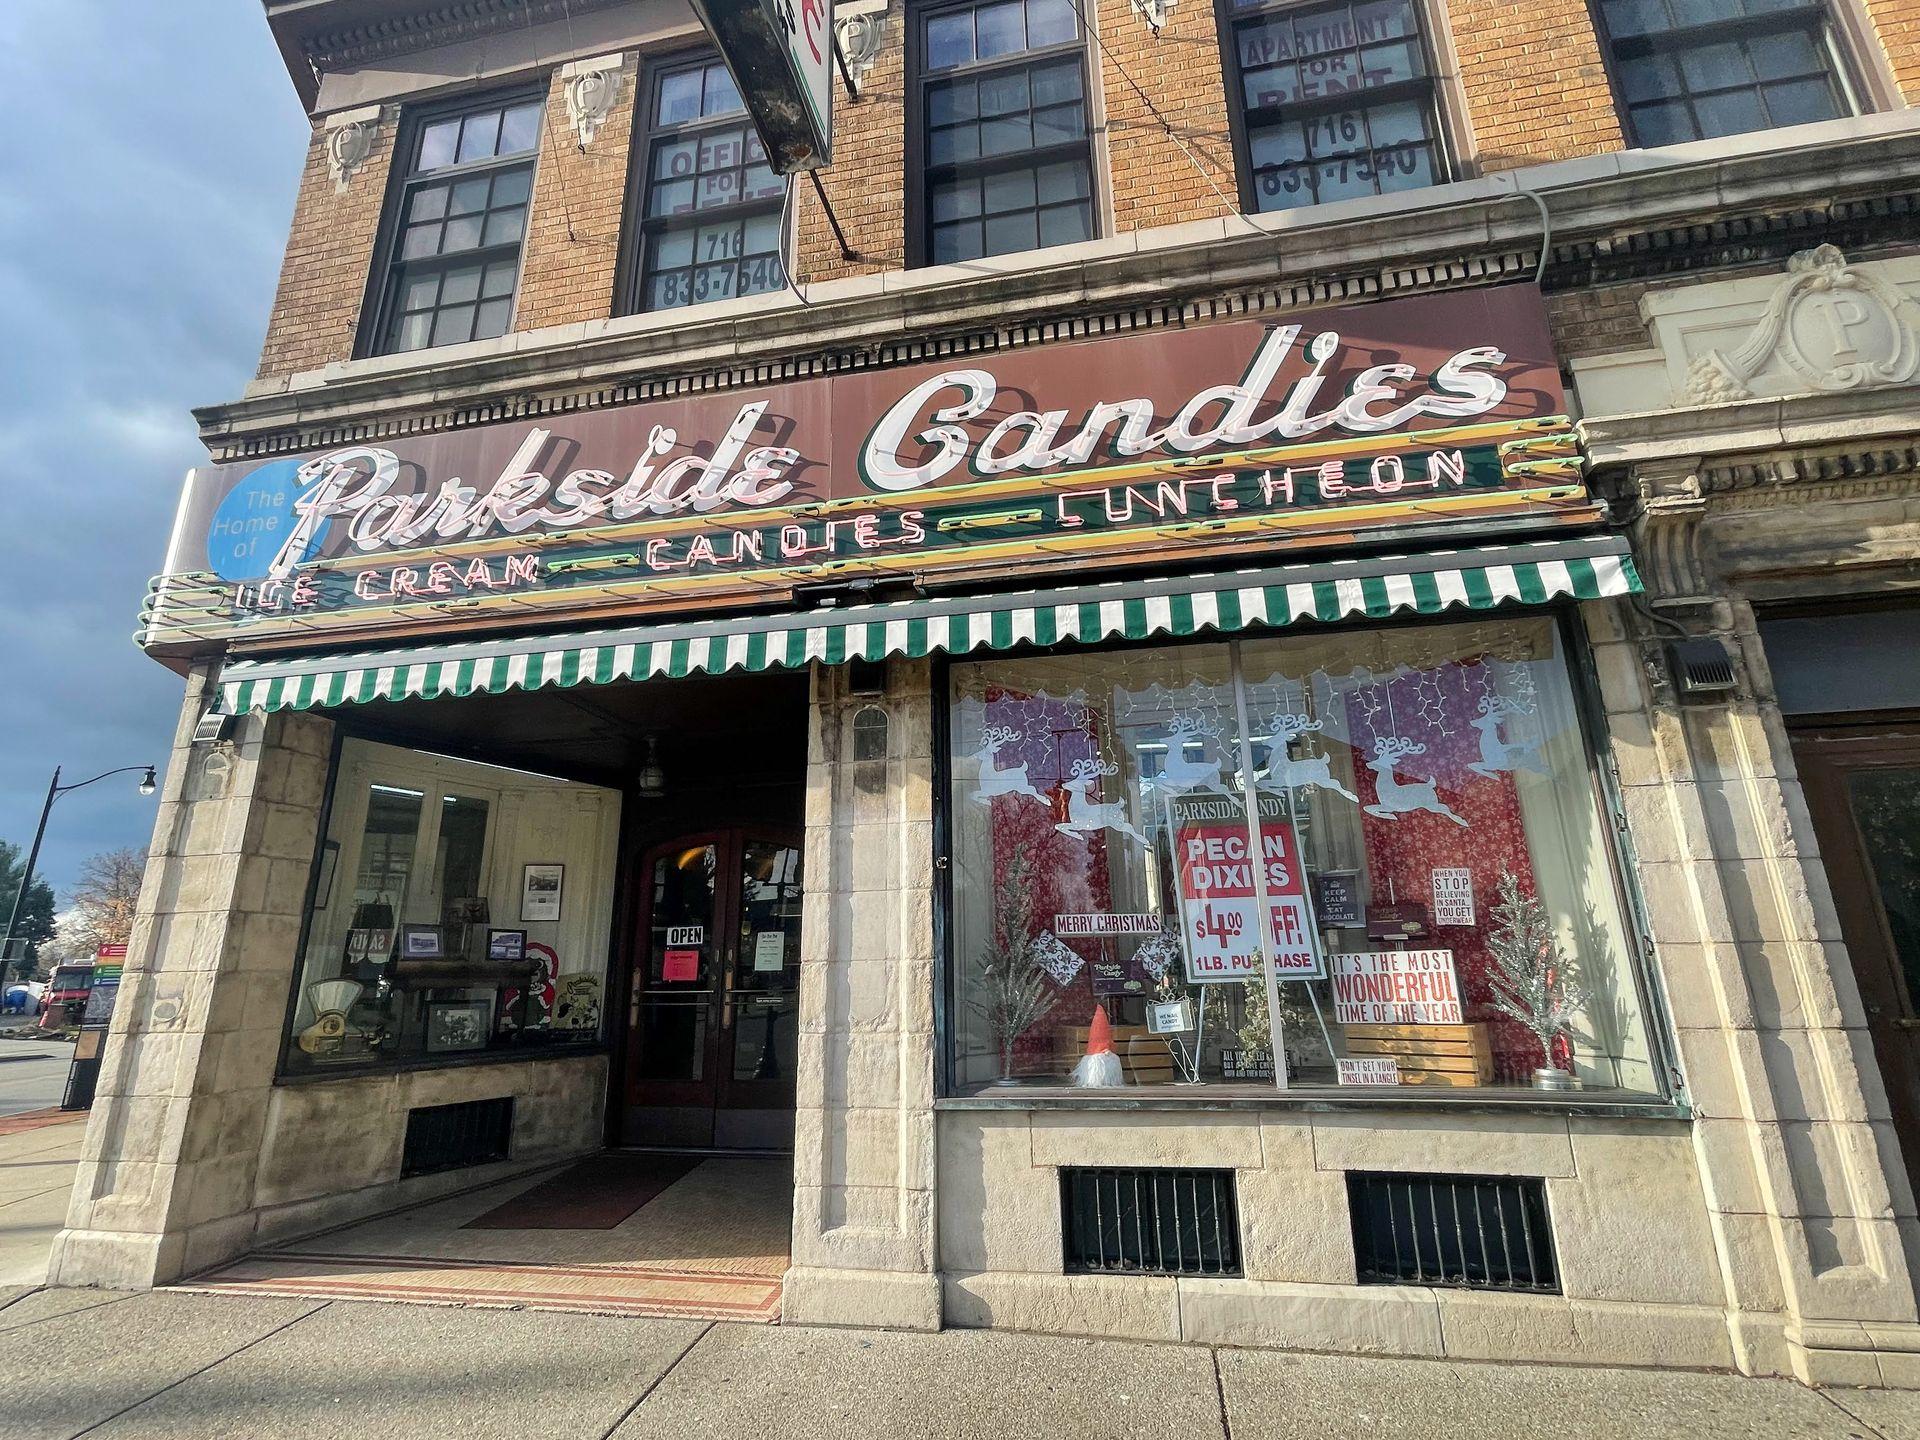 The exterior of a vintage building that reads 'Parkside Candies: Ice Cream, Candies, Luncheon'